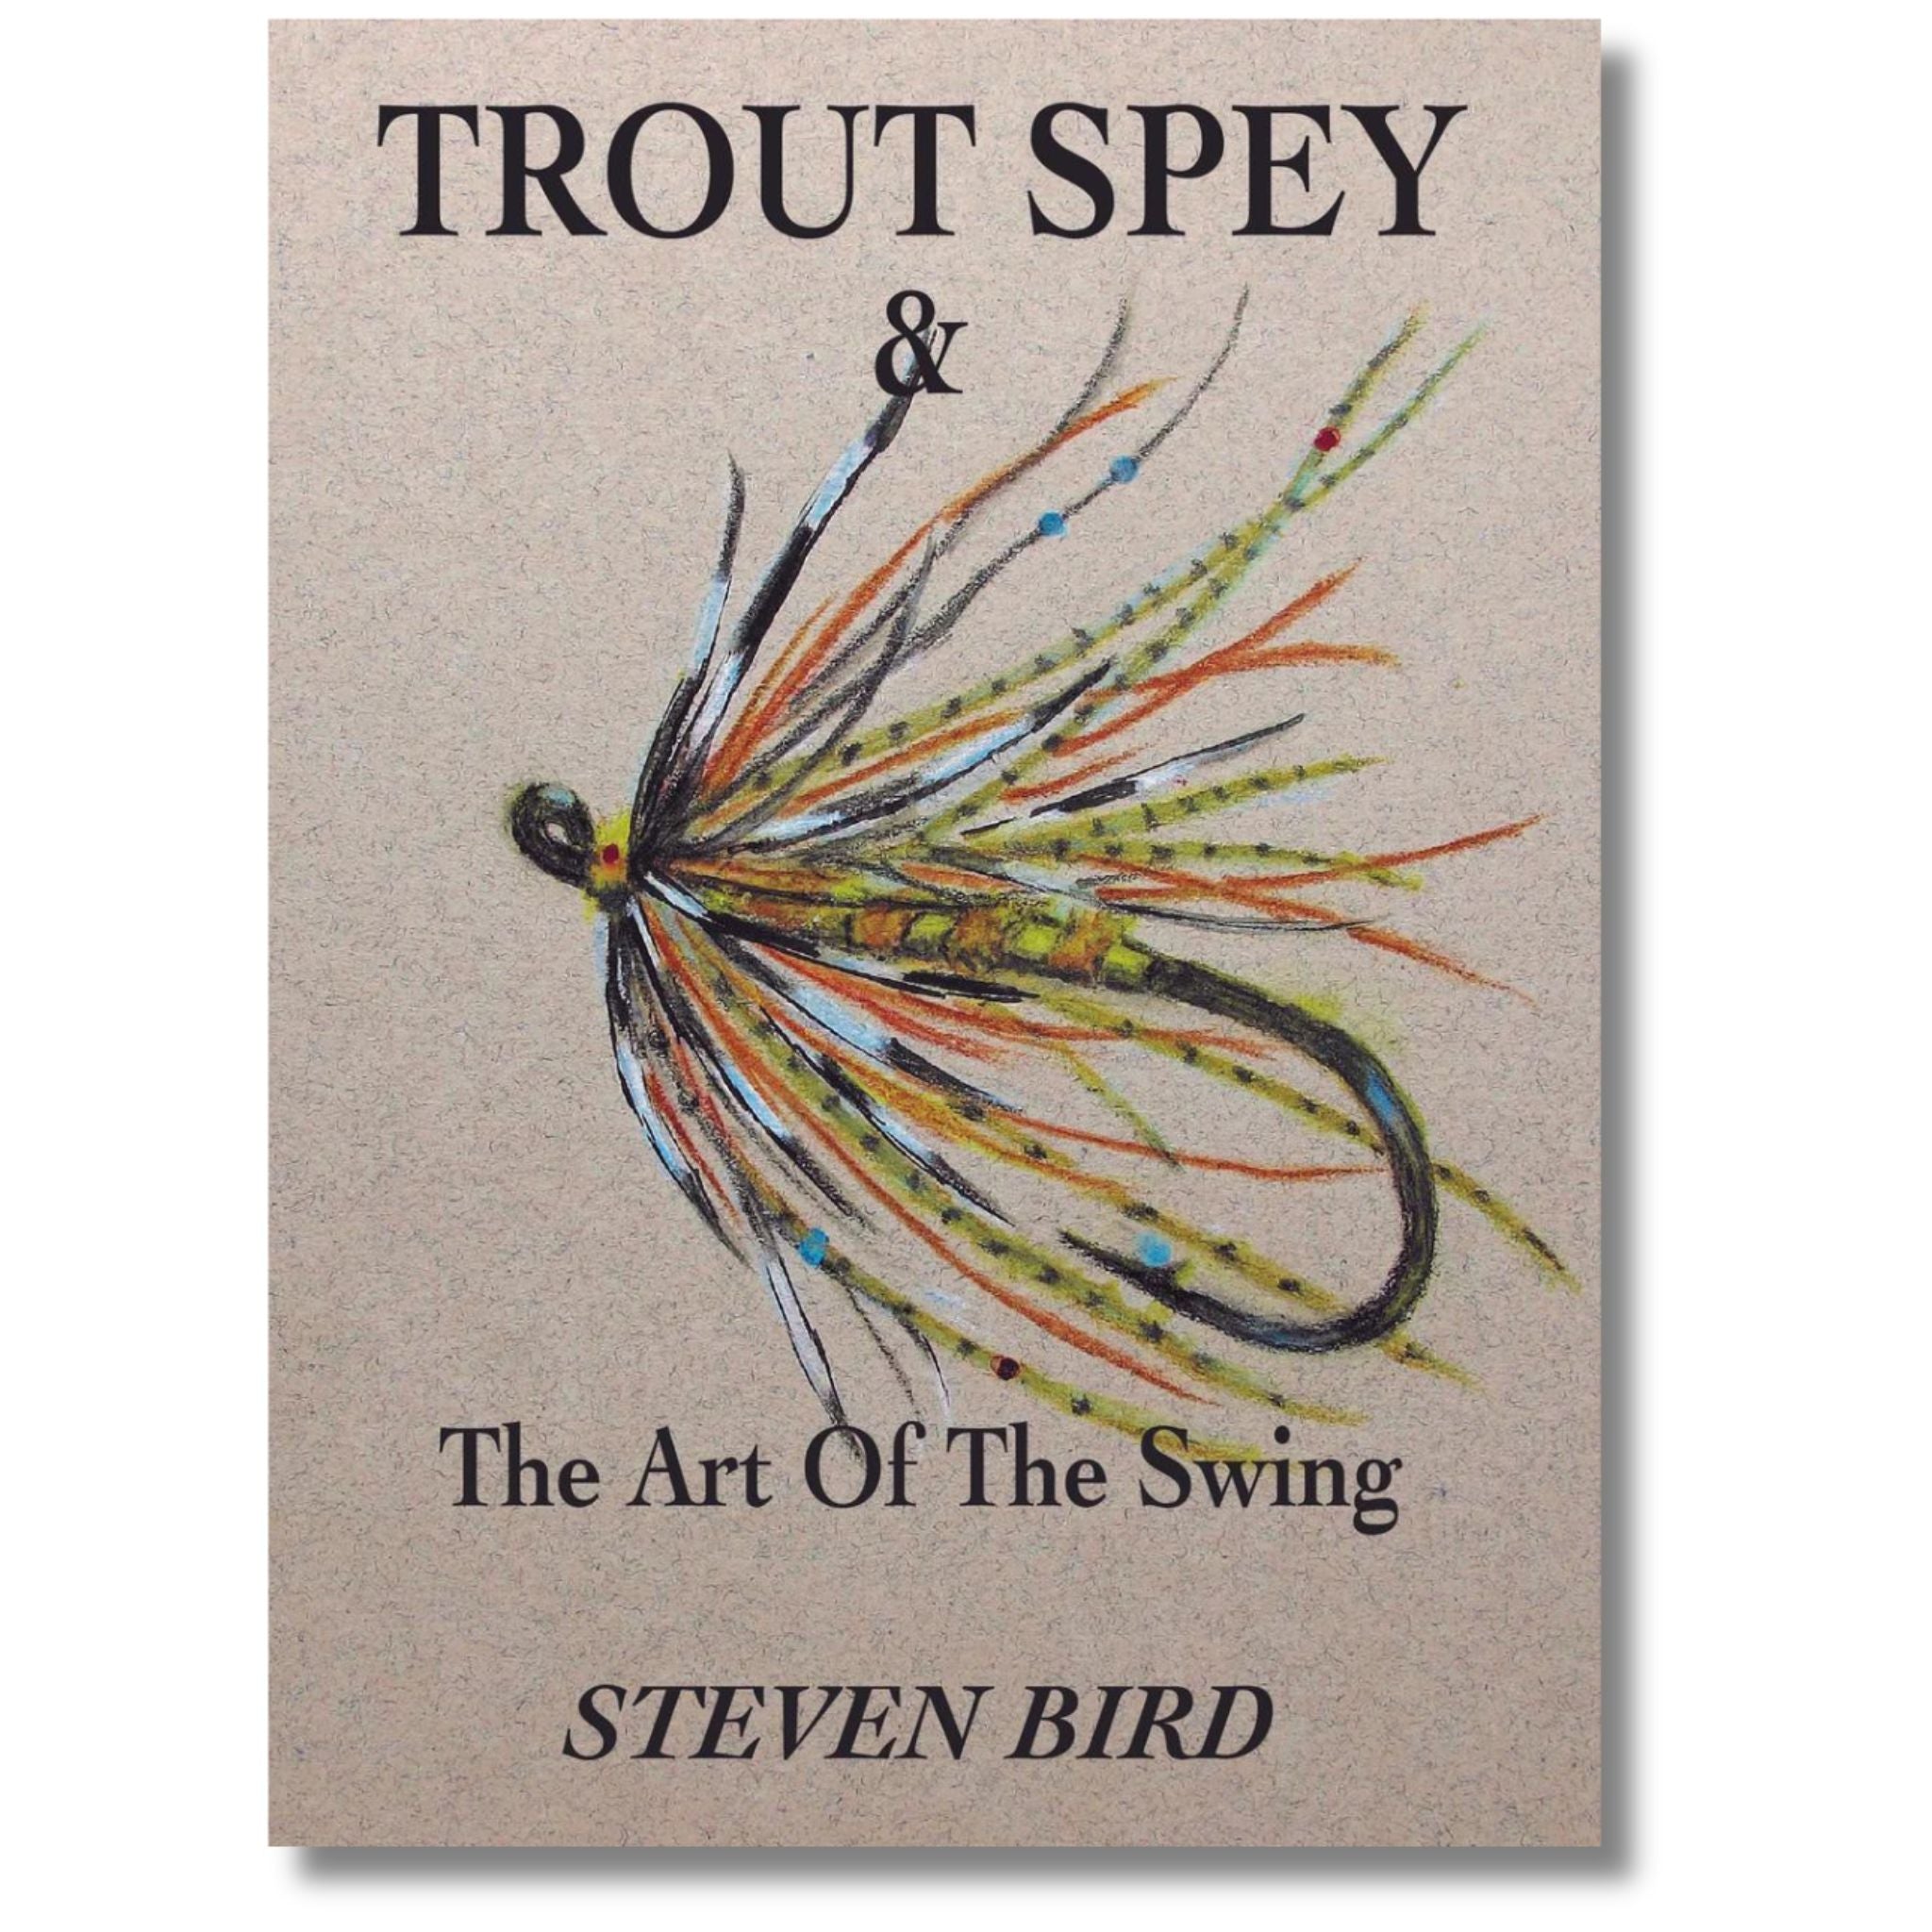 Trout Spey & the Art of the Swing